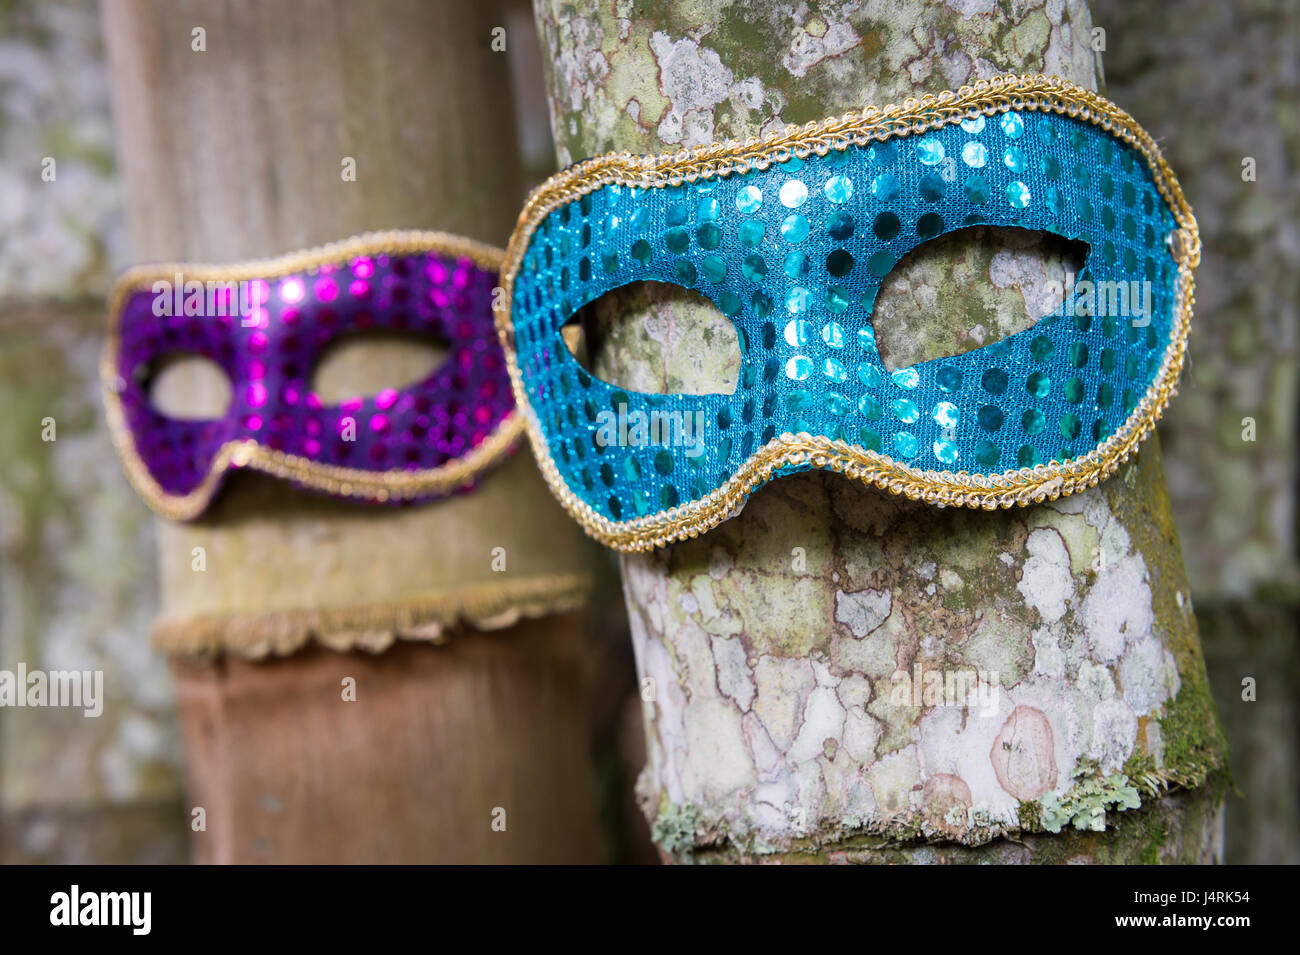 Carnival masks in glittery blue and purple hang on tropical bamboo trunks in Rio de Janeiro, Brazil Stock Photo